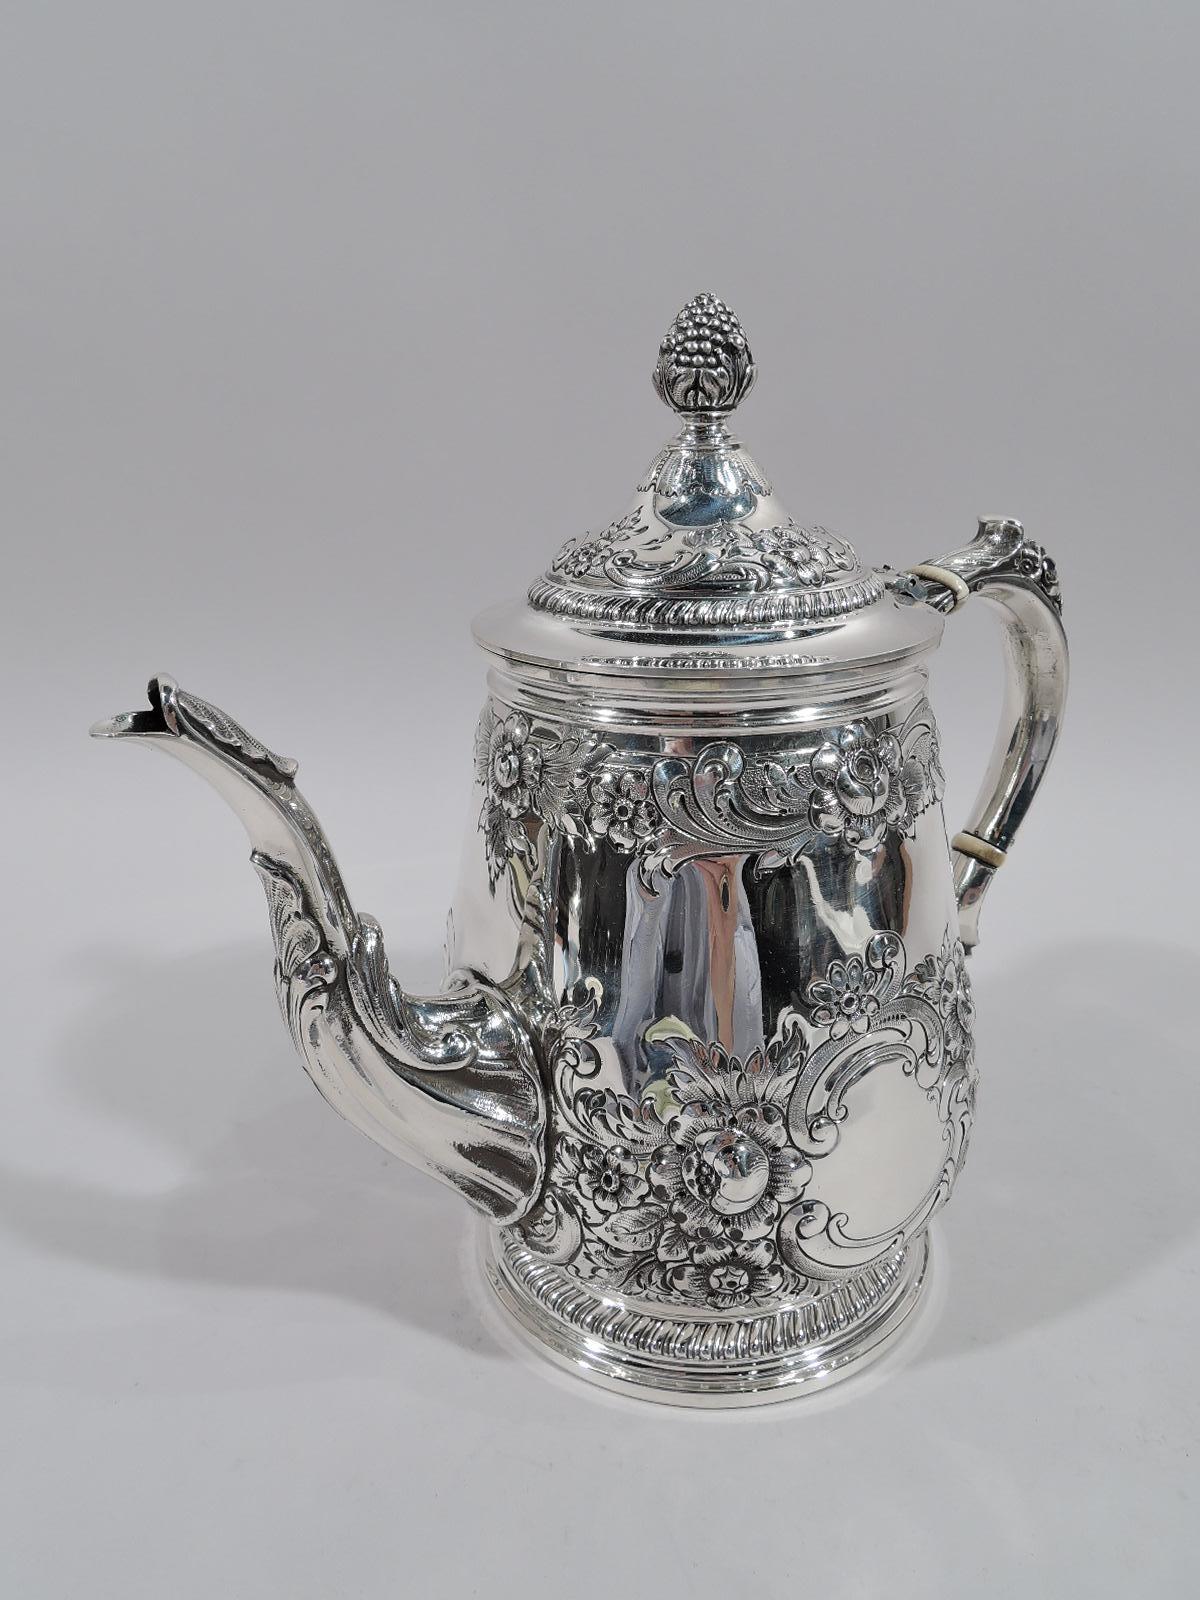 Pretty sterling silver coffeepot in Georgian pattern. Made by Reed & Barton in Taunton in 1937. Gently upward tapering with curved bottom and raised foot. Leaf-capped double-scroll handle and s-scroll pout. Cover hinged and domed with berry finial.